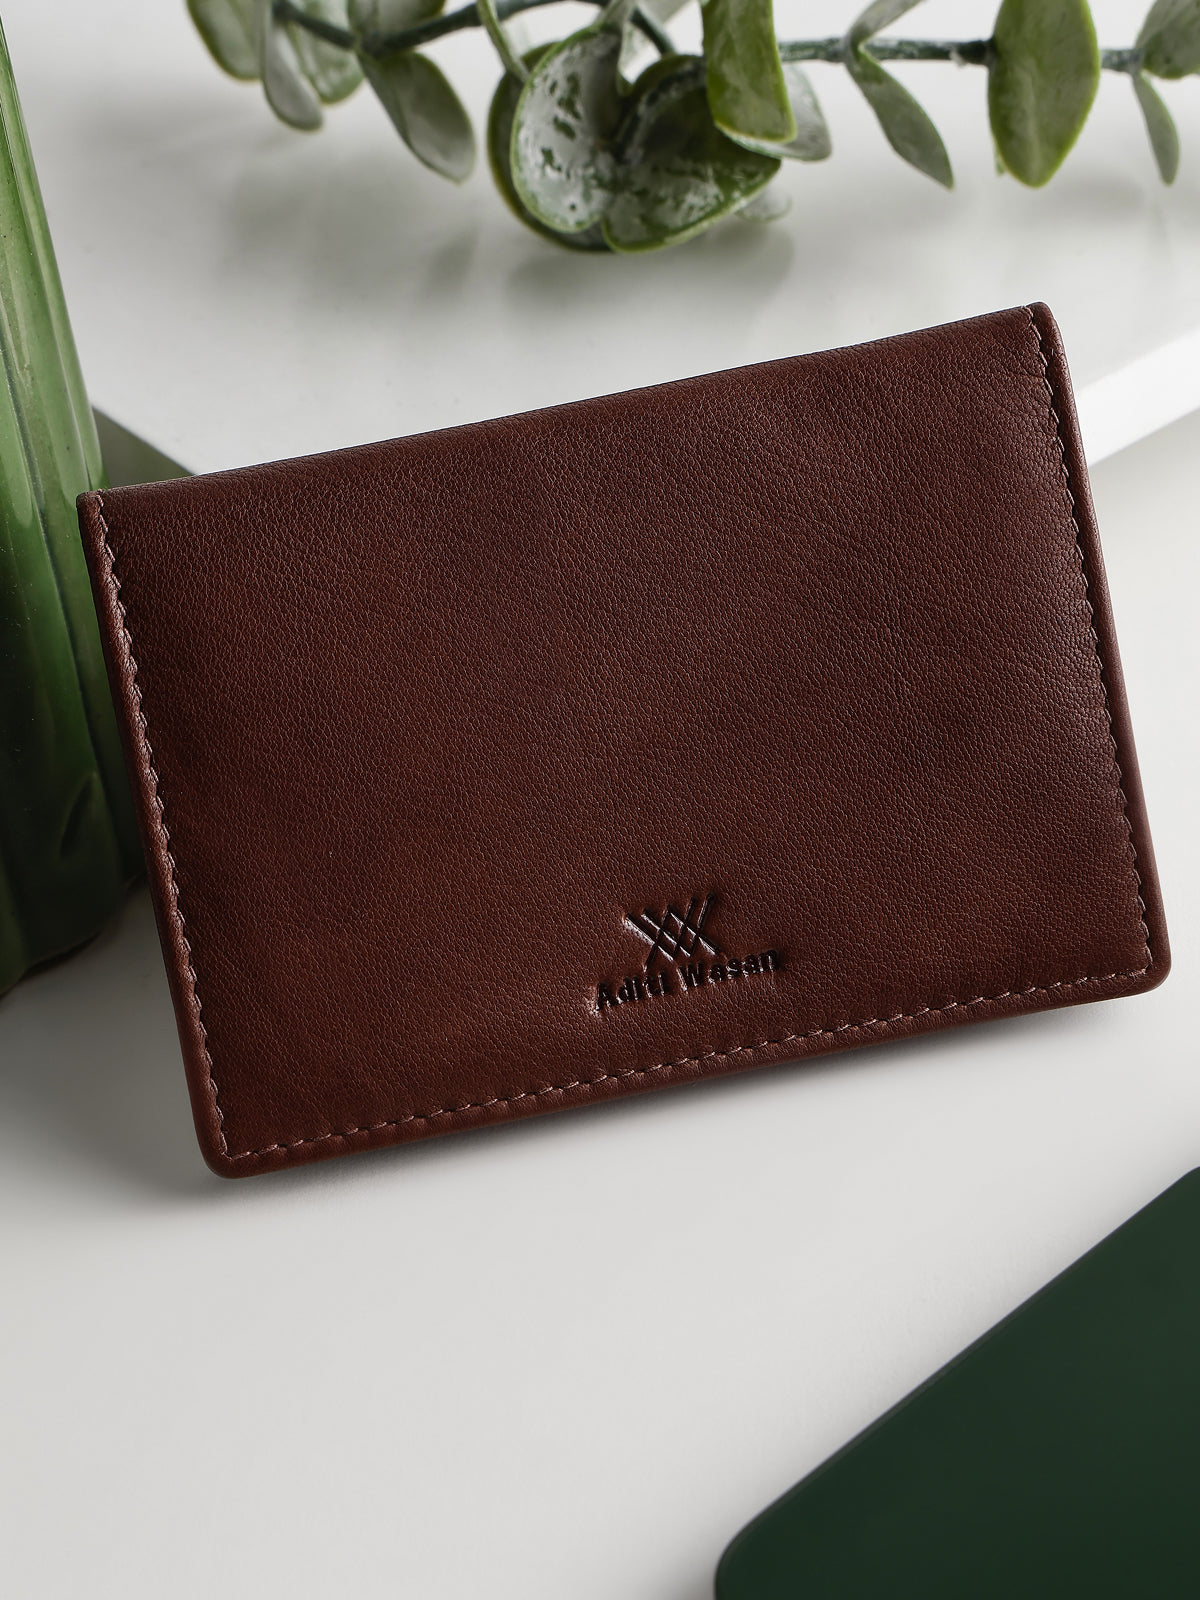 Men's Genuine Leather Cardholder with Flab Button Closure Holds up to 15 Cards - Brown